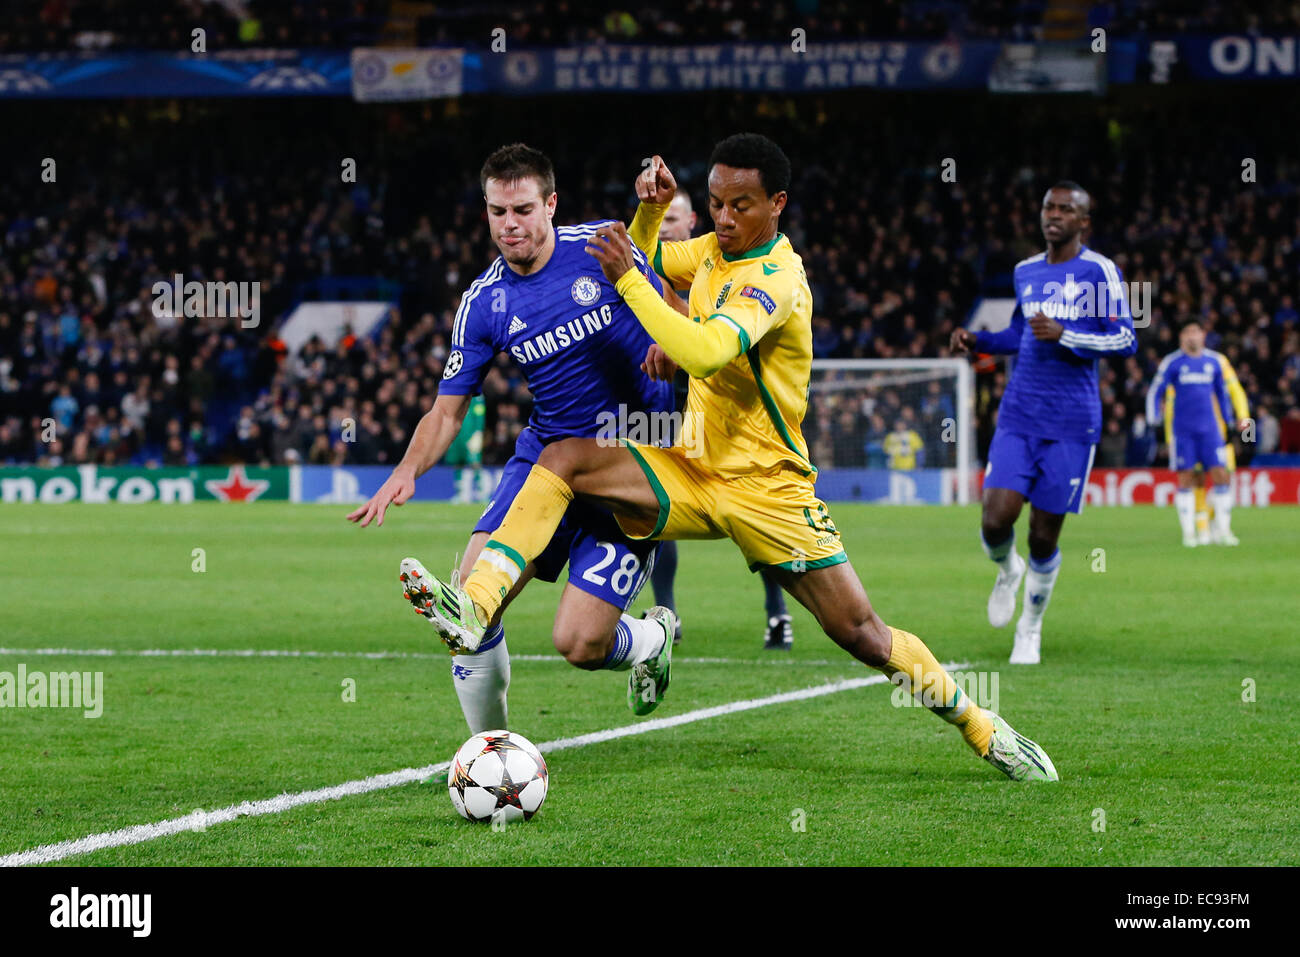 London, UK. 10th Dec, 2014. Andre Carrillo (Sporting), Cesar Azpilicueta (Chelsea) Football/Soccer : Andre Carrillo of Sporting and Cesar Azpilicueta of Chelsea battle for the ball during the UEFA Champions League Group Stage match between Chelsea and Sporting Clube de Portugal at Stamford Bridge in London, England . Credit:  AFLO/Alamy Live News Stock Photo